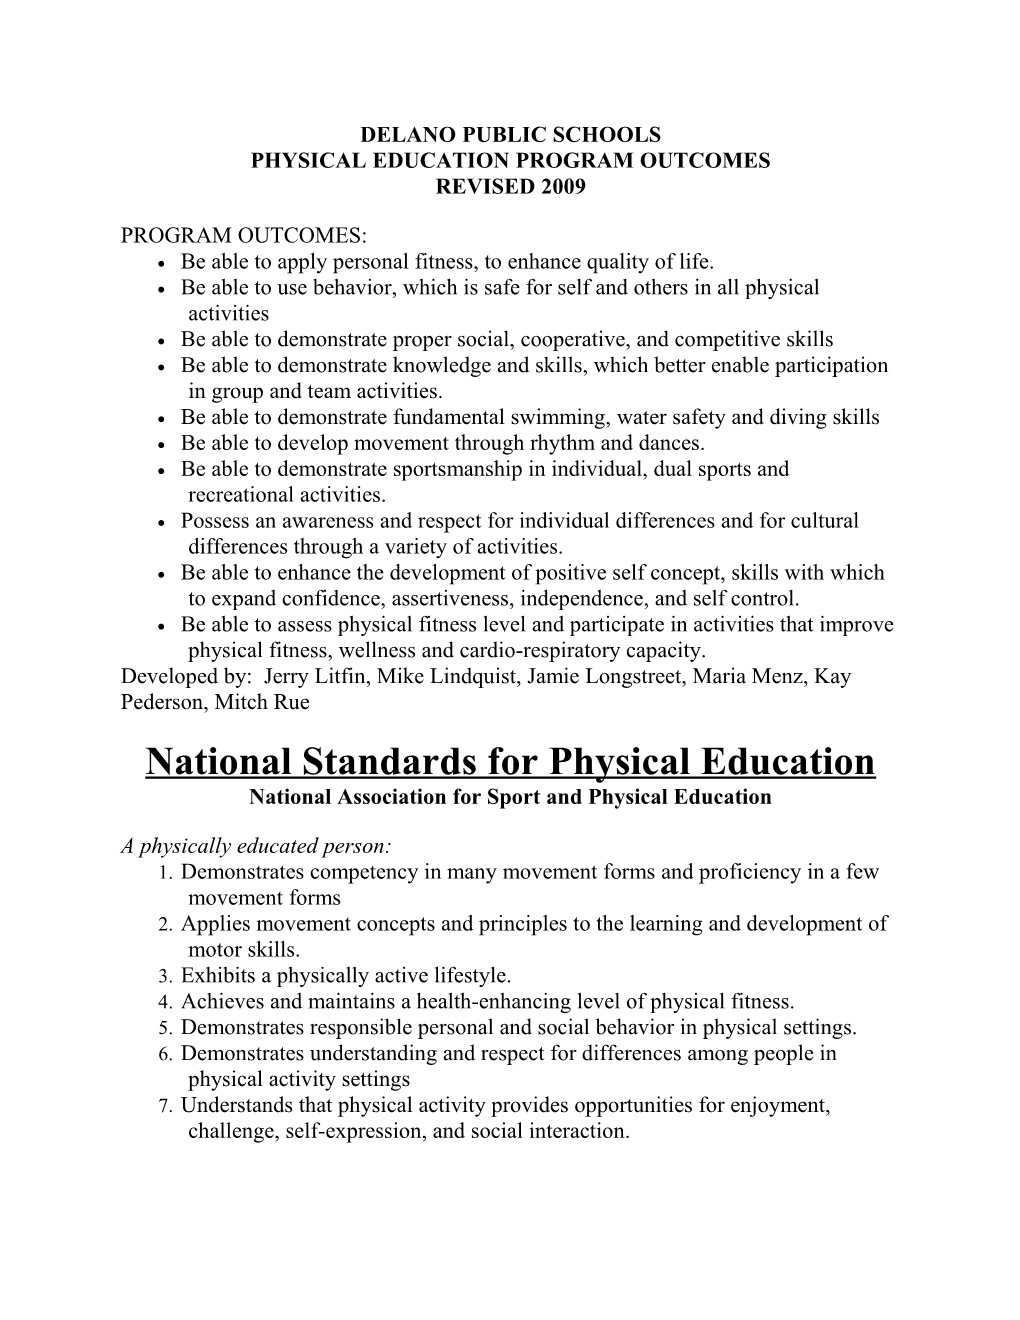 Physical Education Program Outcomes